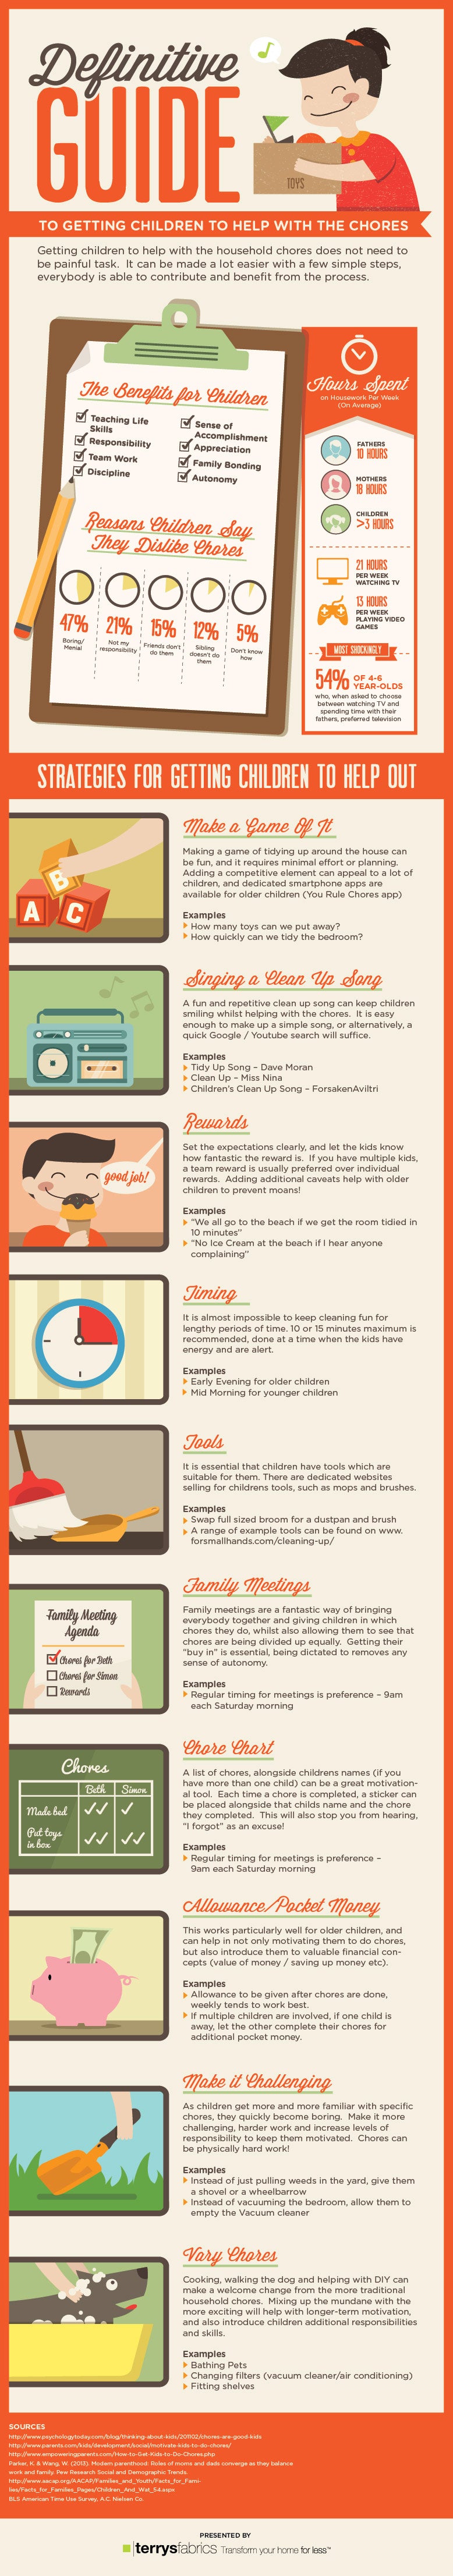 Getting Children To Help With Chores Infographic